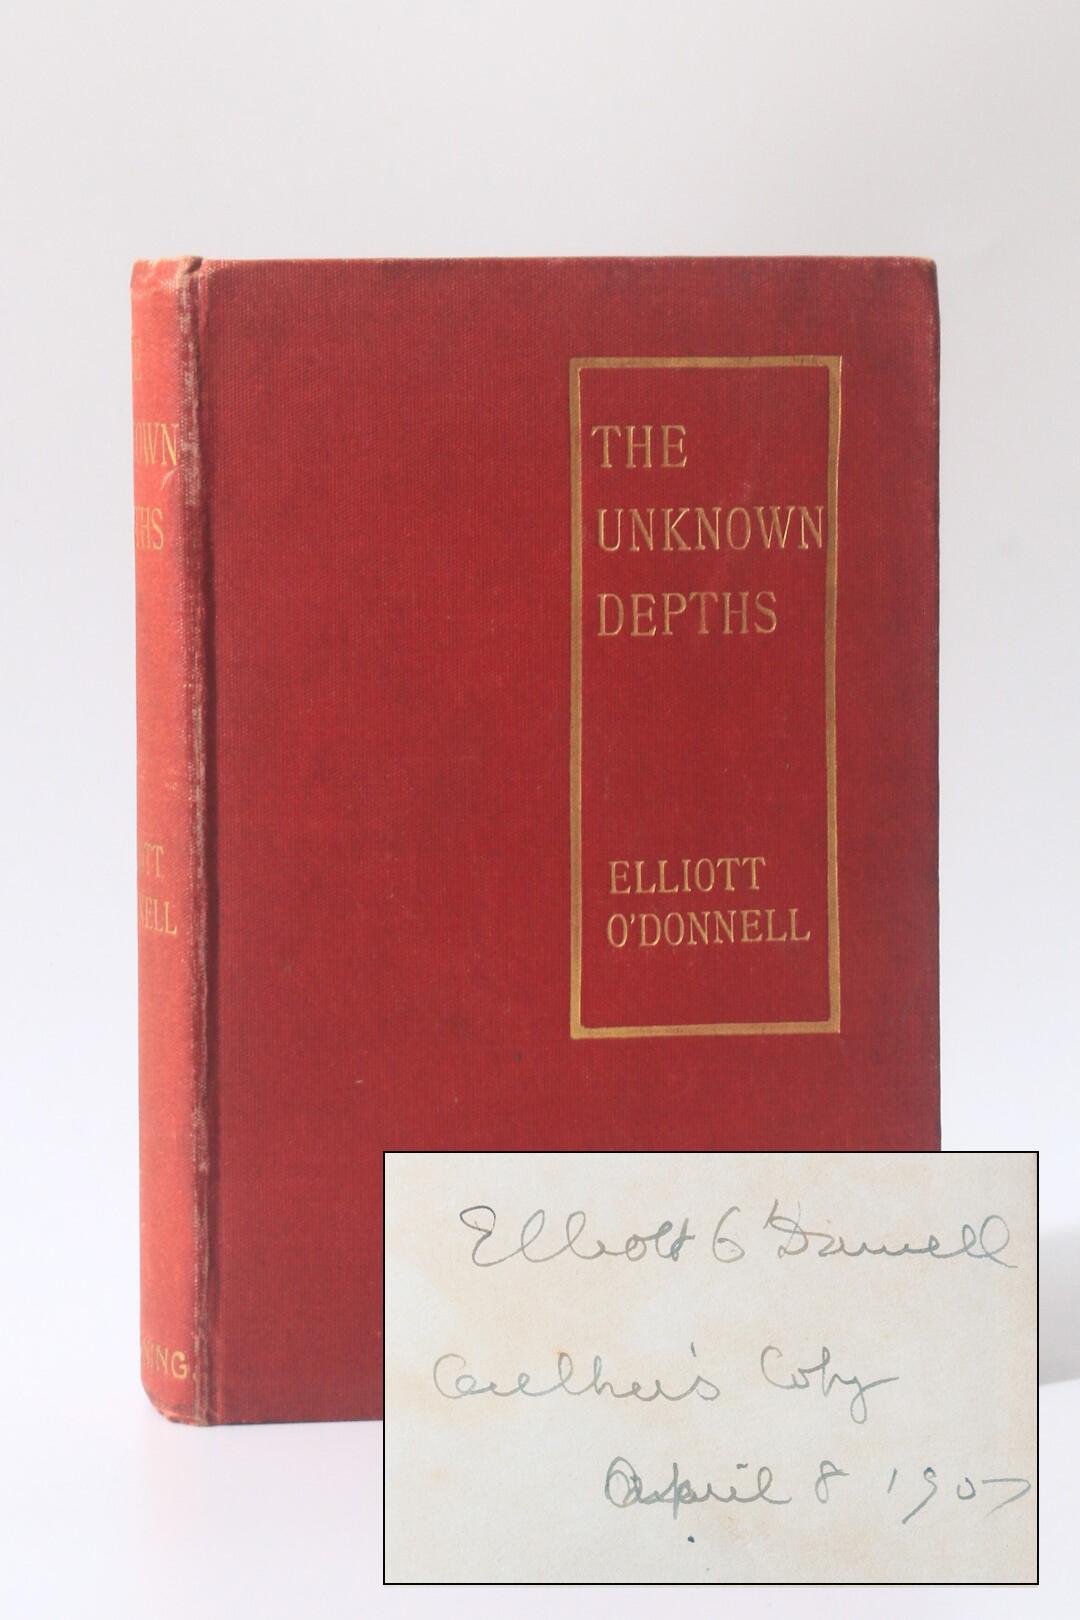 Elliott O'Donnell - The Unknown Depths - The Author's Copy - Greening & Co., 1905, Signed First Edition.